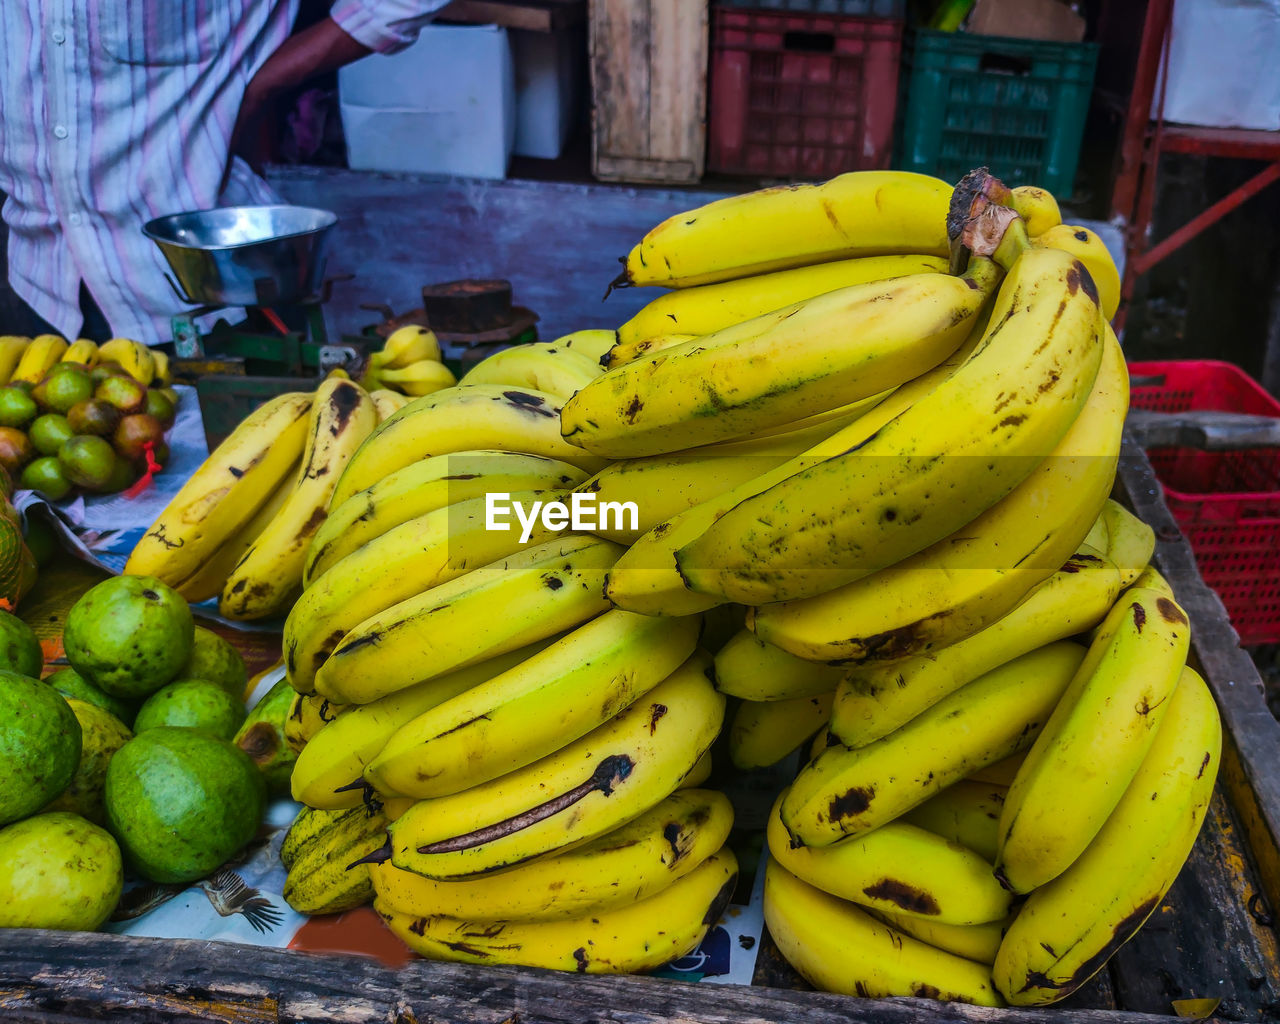 banana, healthy eating, food, cooking plantain, fruit, food and drink, wellbeing, freshness, produce, market, plant, yellow, retail, tropical fruit, abundance, business, market stall, adult, occupation, clothing, person, ripe, one person, bunch, outdoors, day, for sale, selling, city, business finance and industry, men